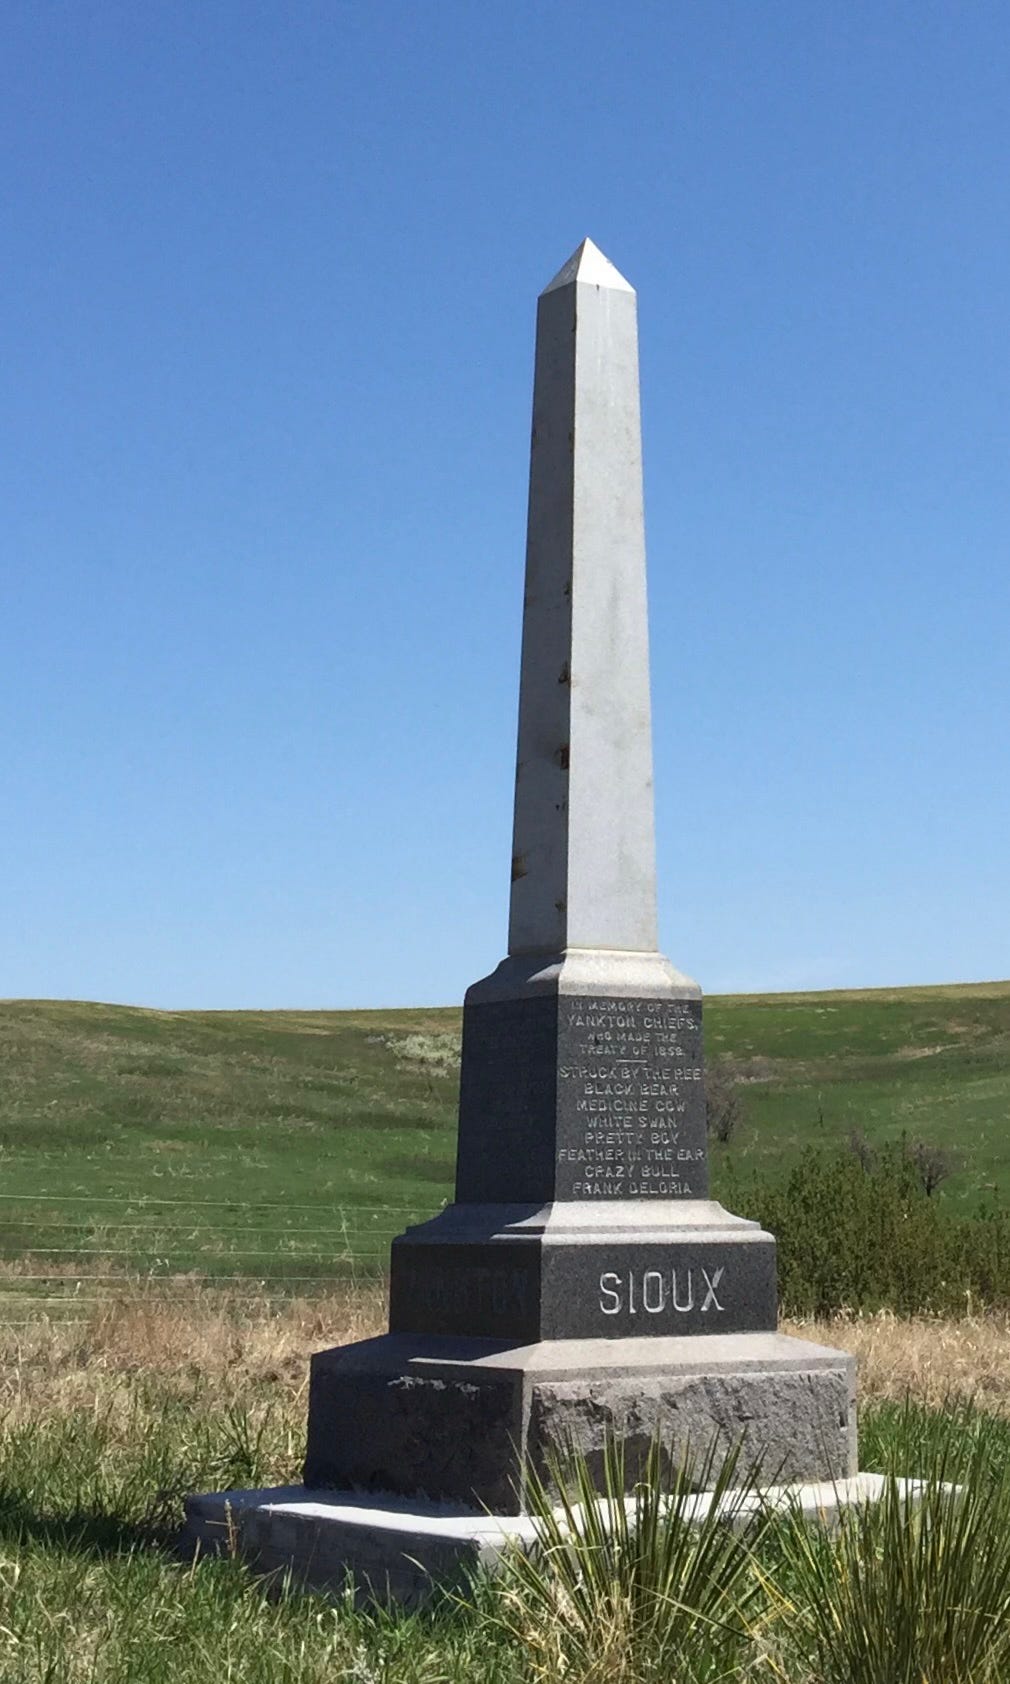 An obelisk set against blue sky, the word Sioux carved into the base, and, in smaller letters, names are carved